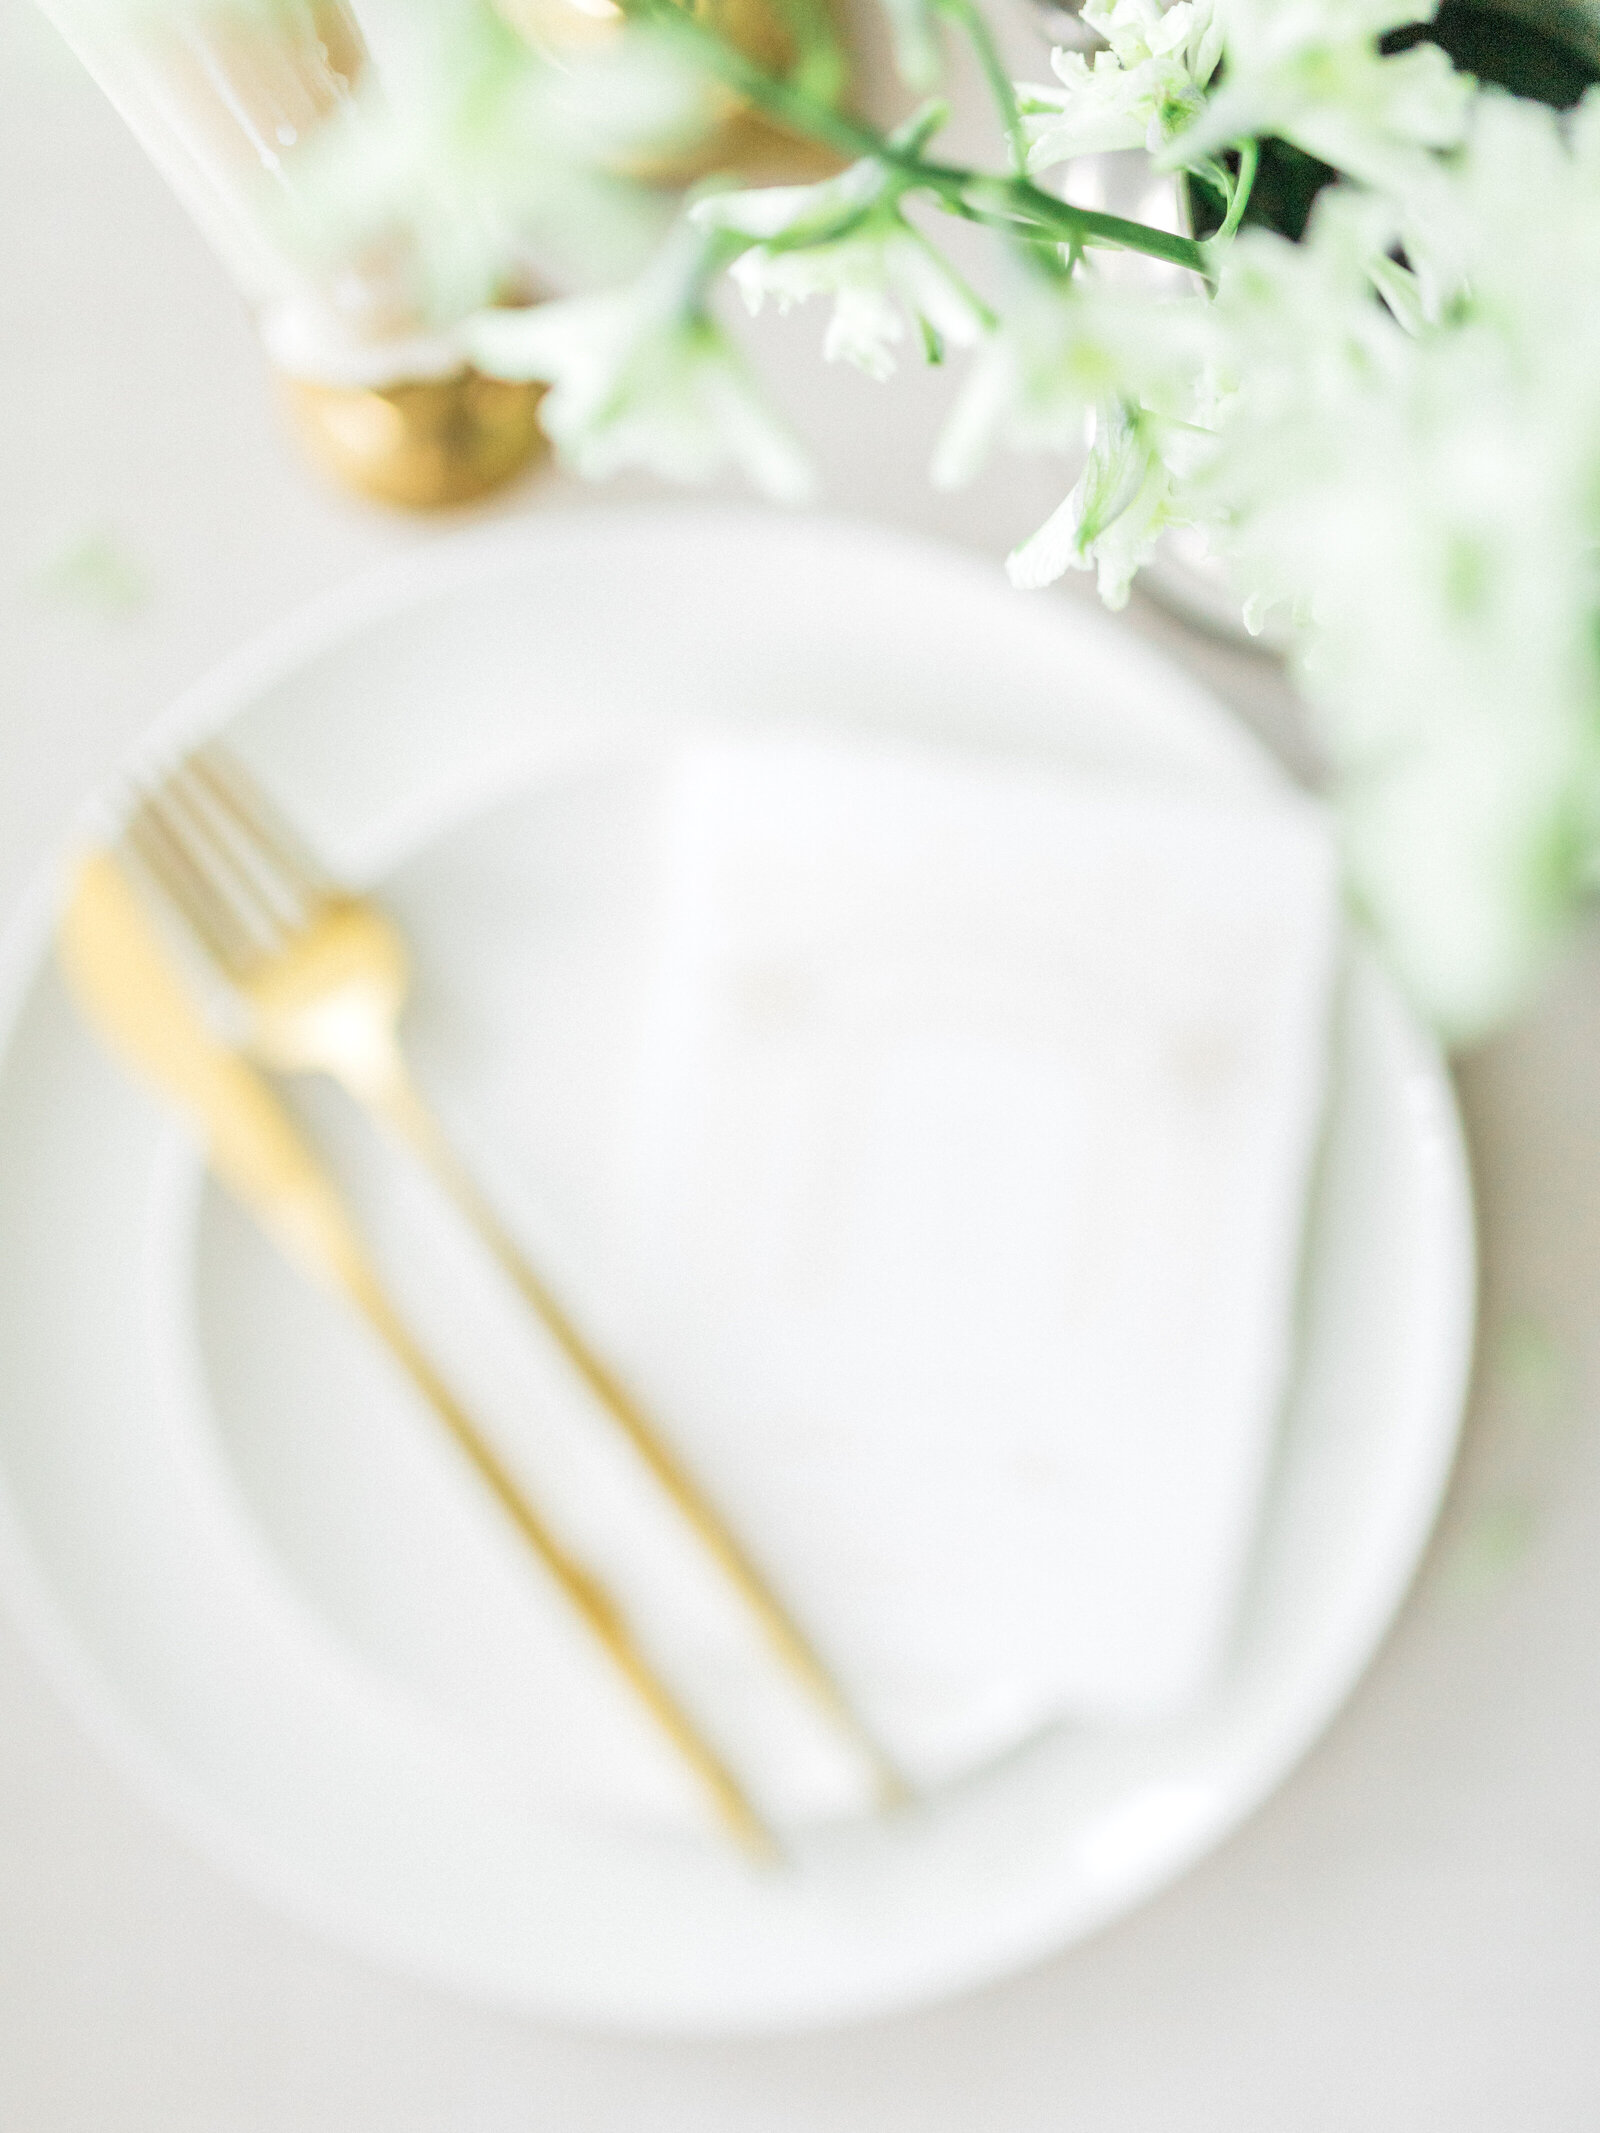 Wedding Cutlery and Table setting